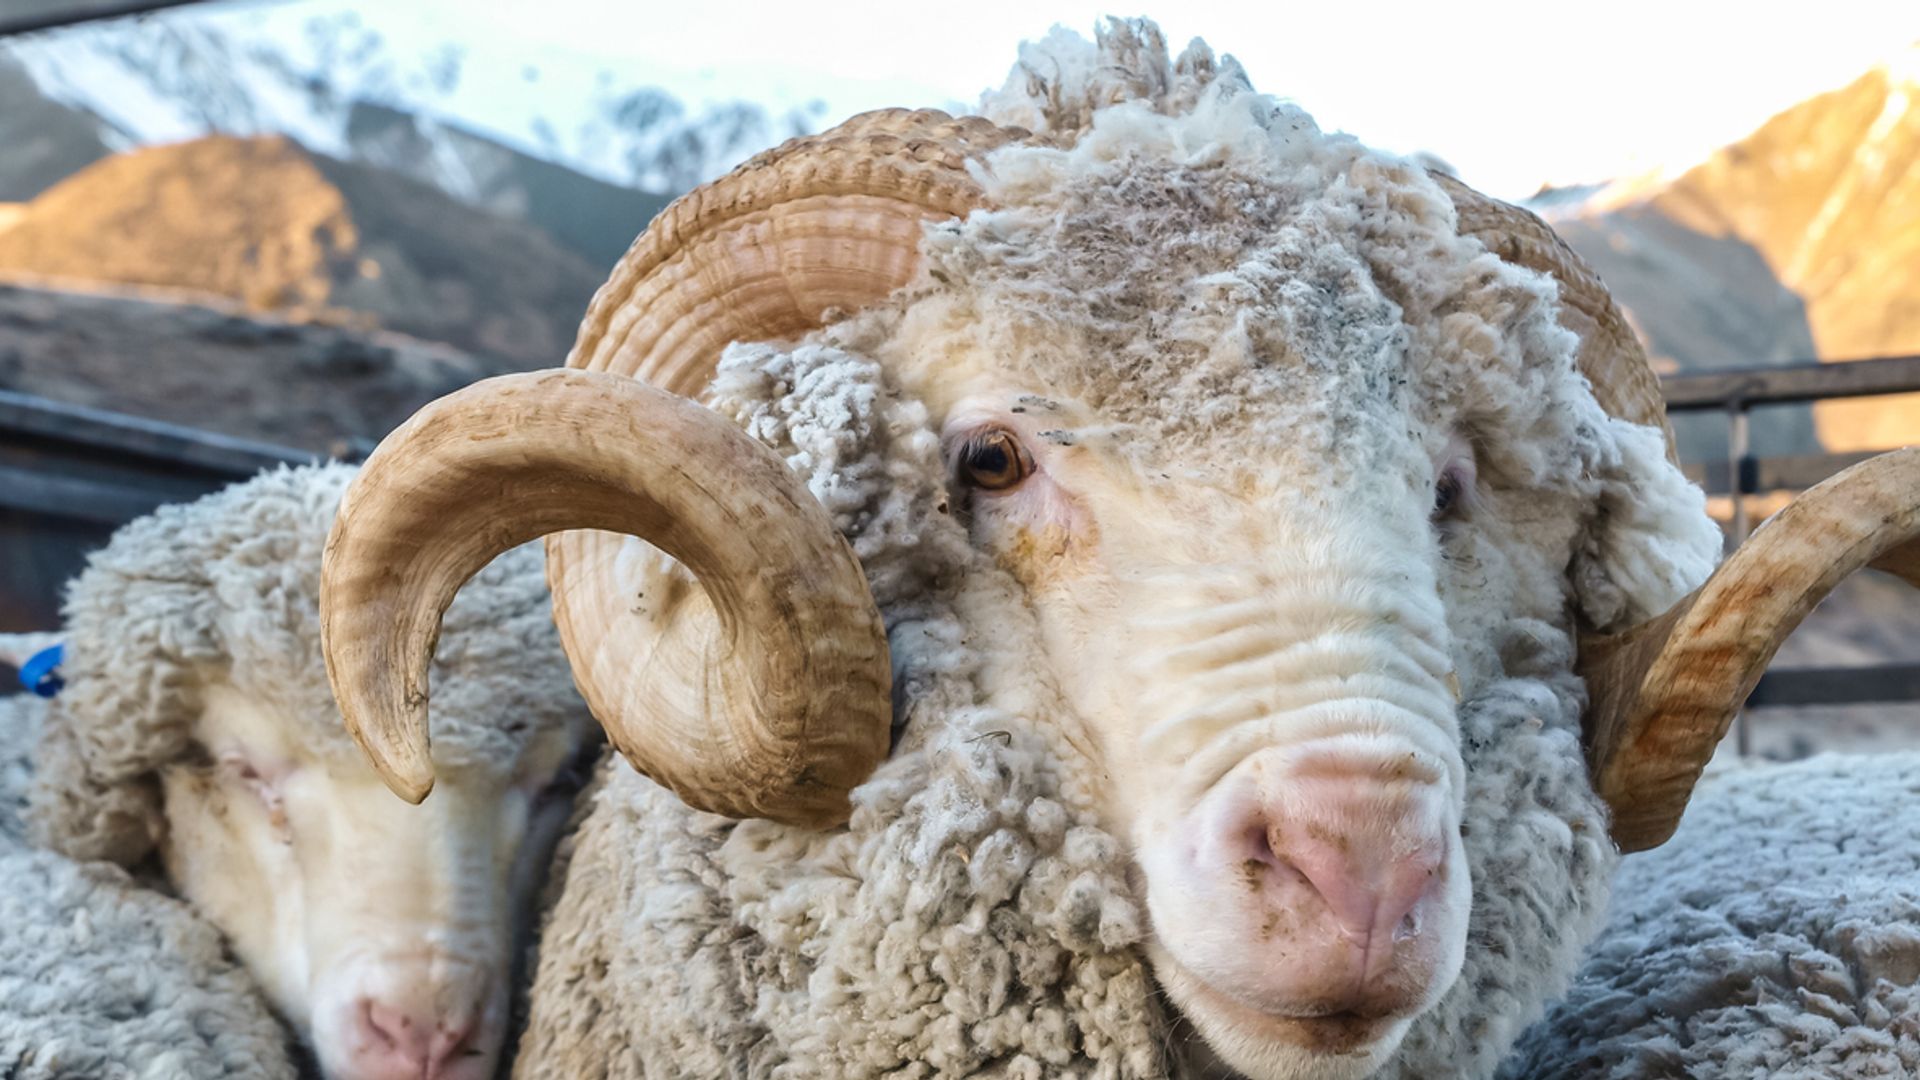 Ram killed by police after elderly couple found dead in paddock